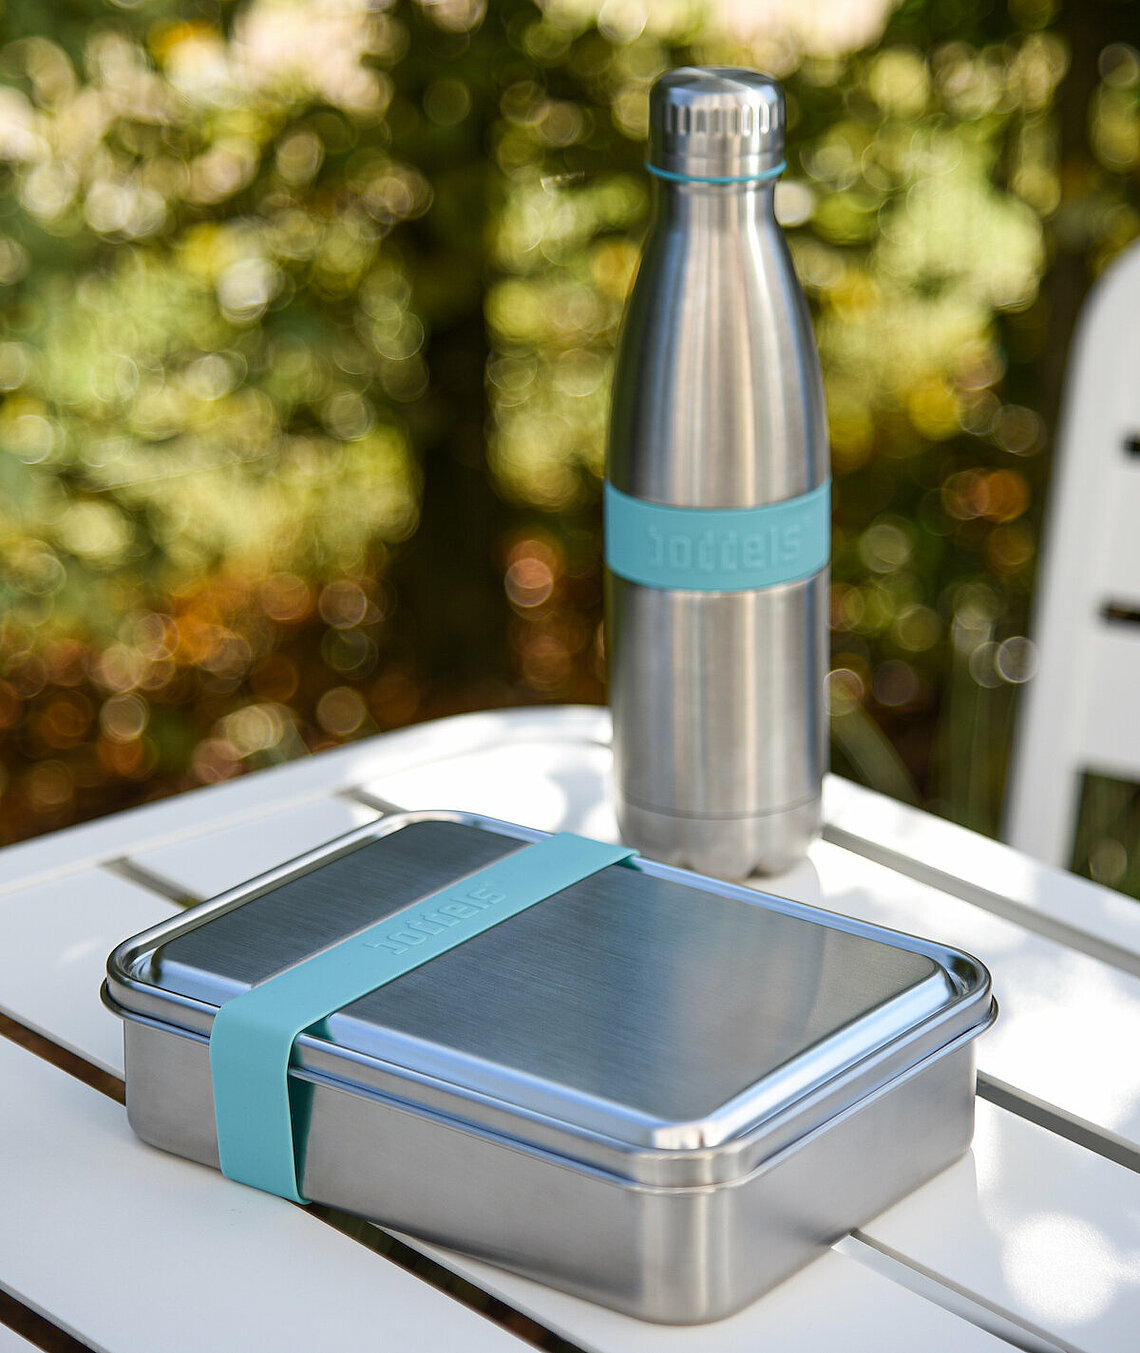 5 Reasons You Need a Thermal Lunch Box: The Stainless Steel Food